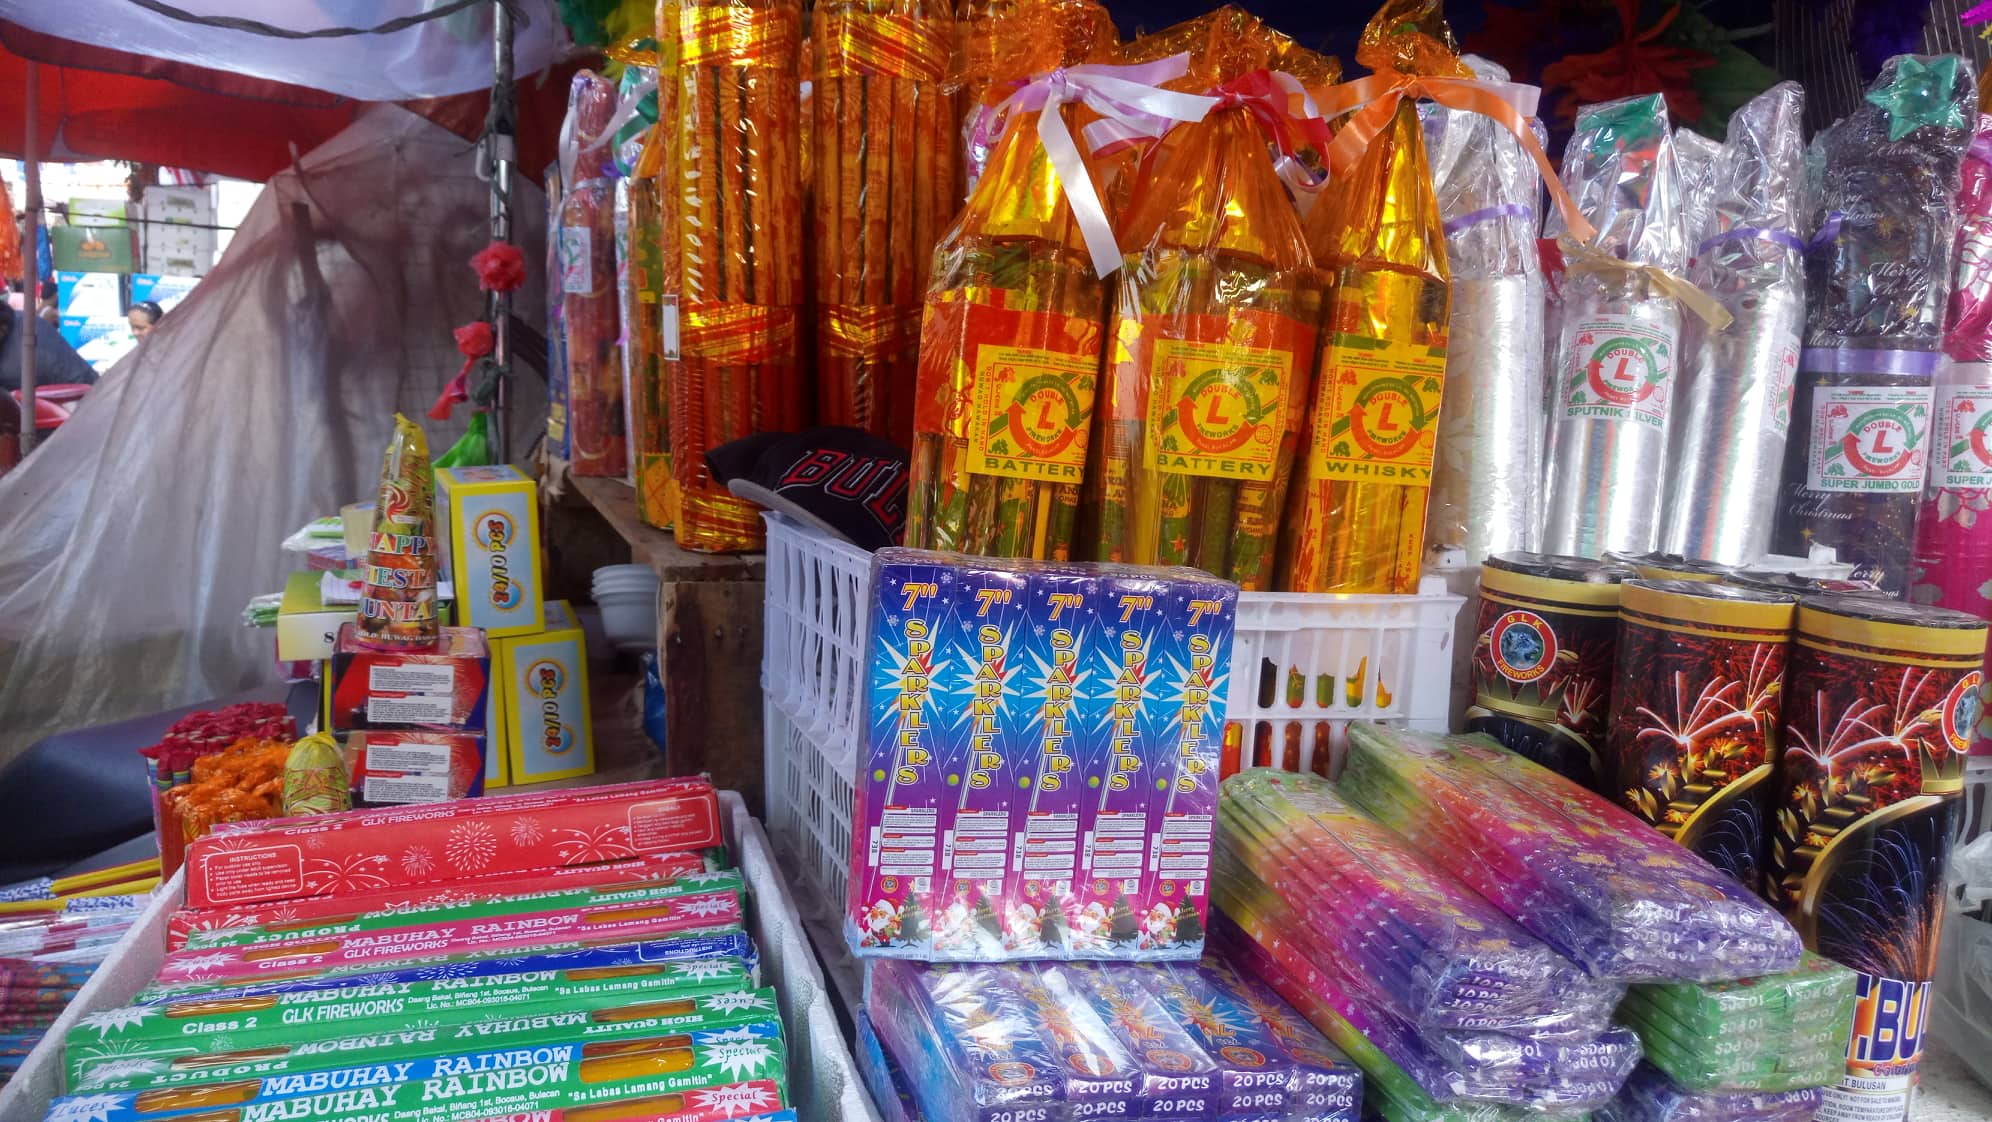 Kwitis' leading cause of firecracker injuries; cases up to 277 - PTV News